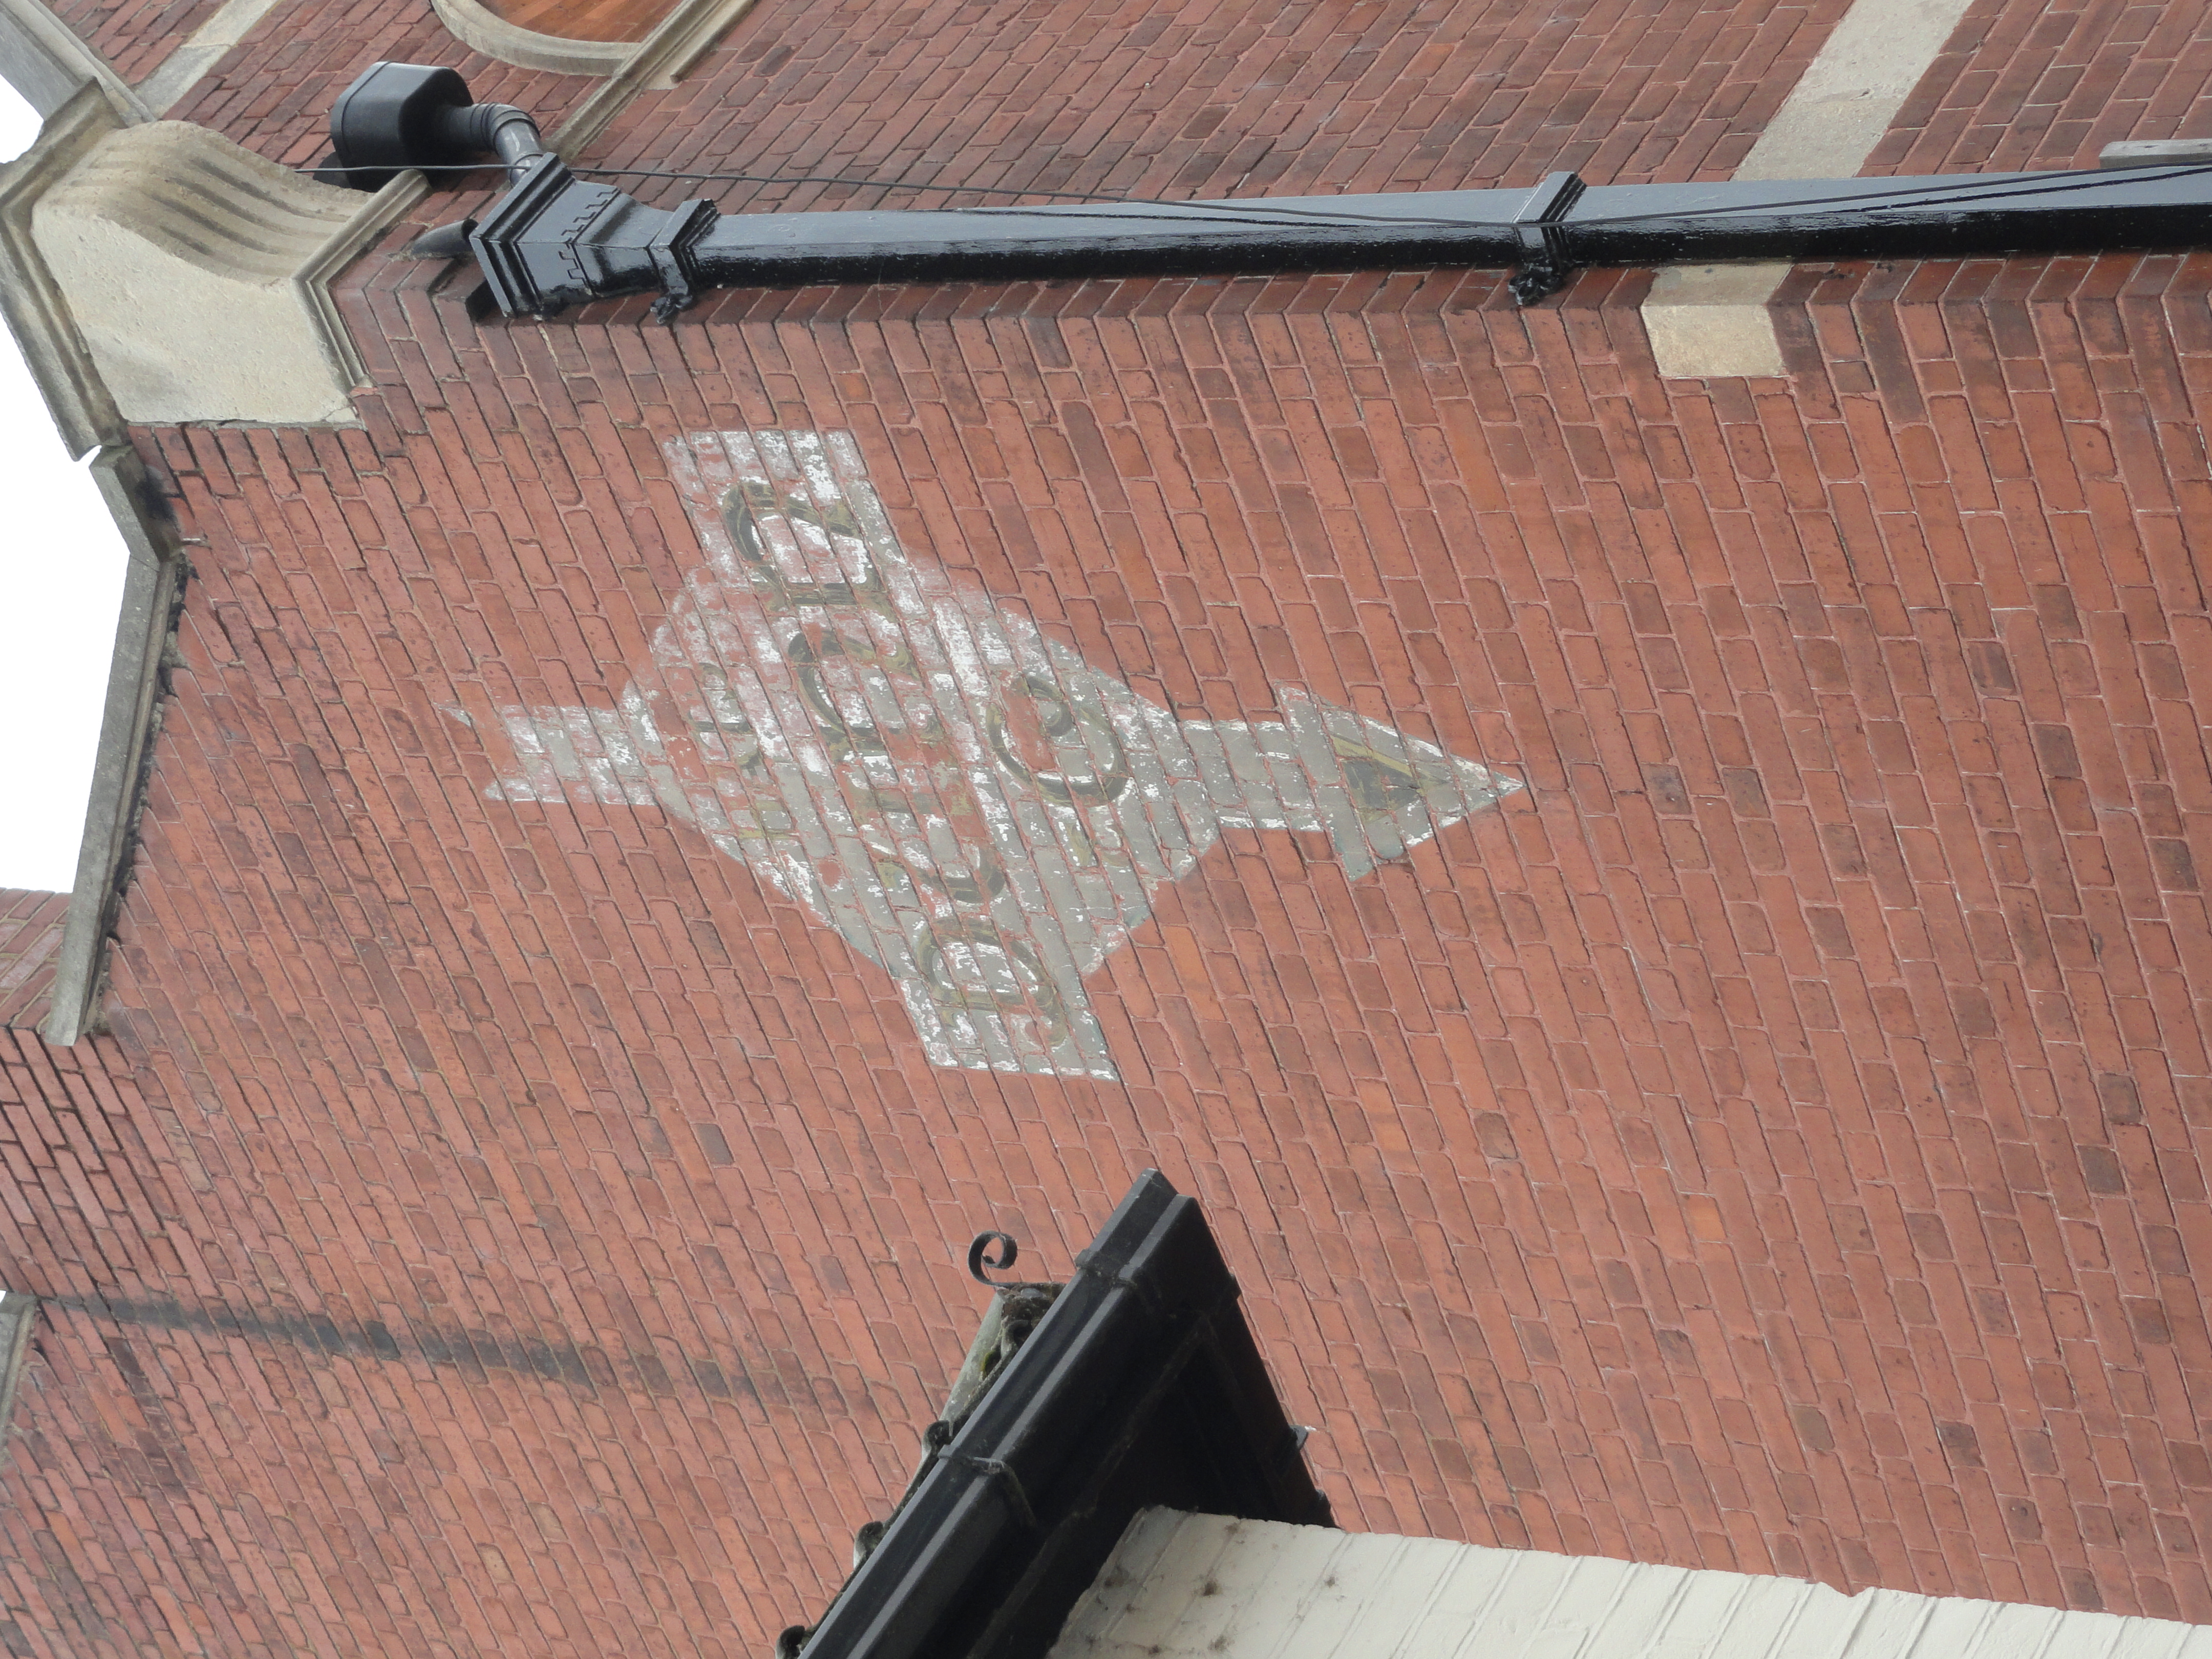 Dunn ghost sign on an old brick building